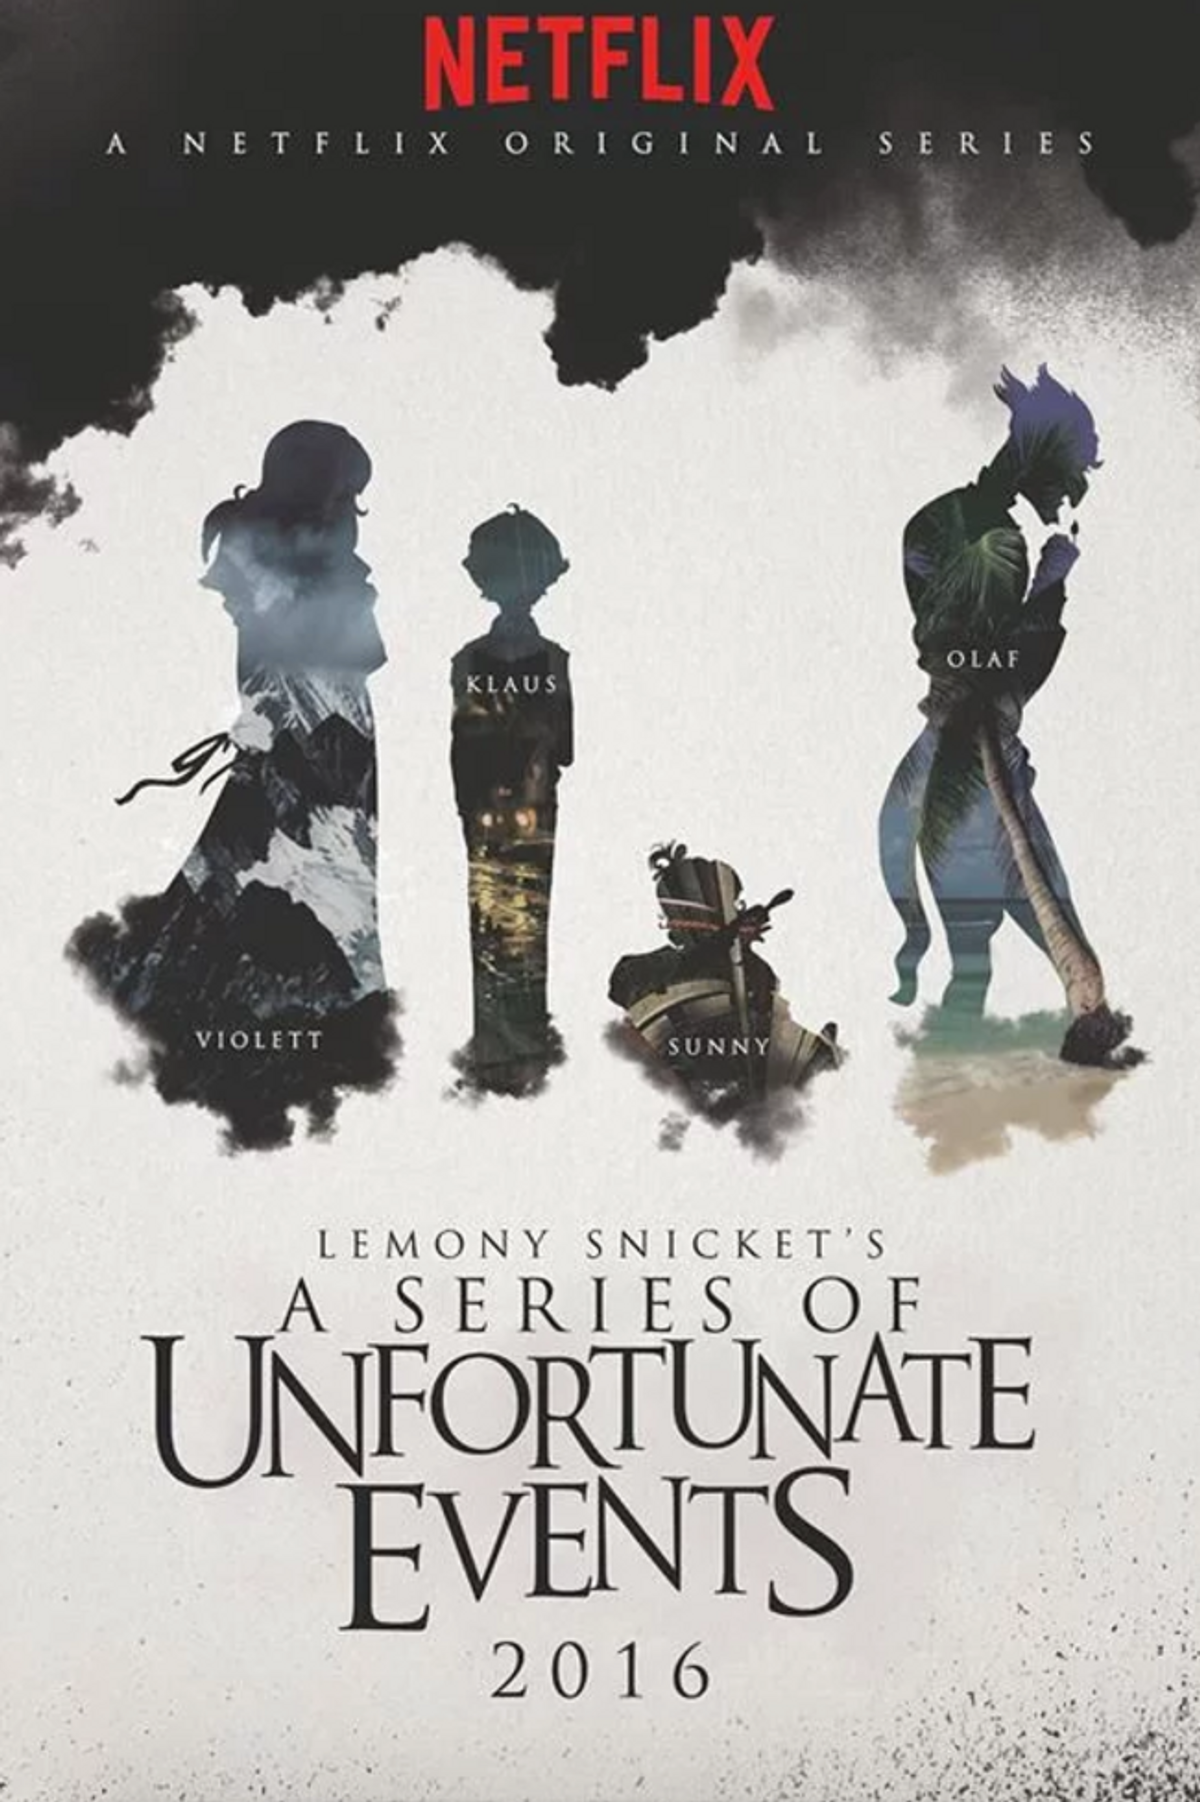 Why you Should Begin your Year with A Series of Unfortunate Events